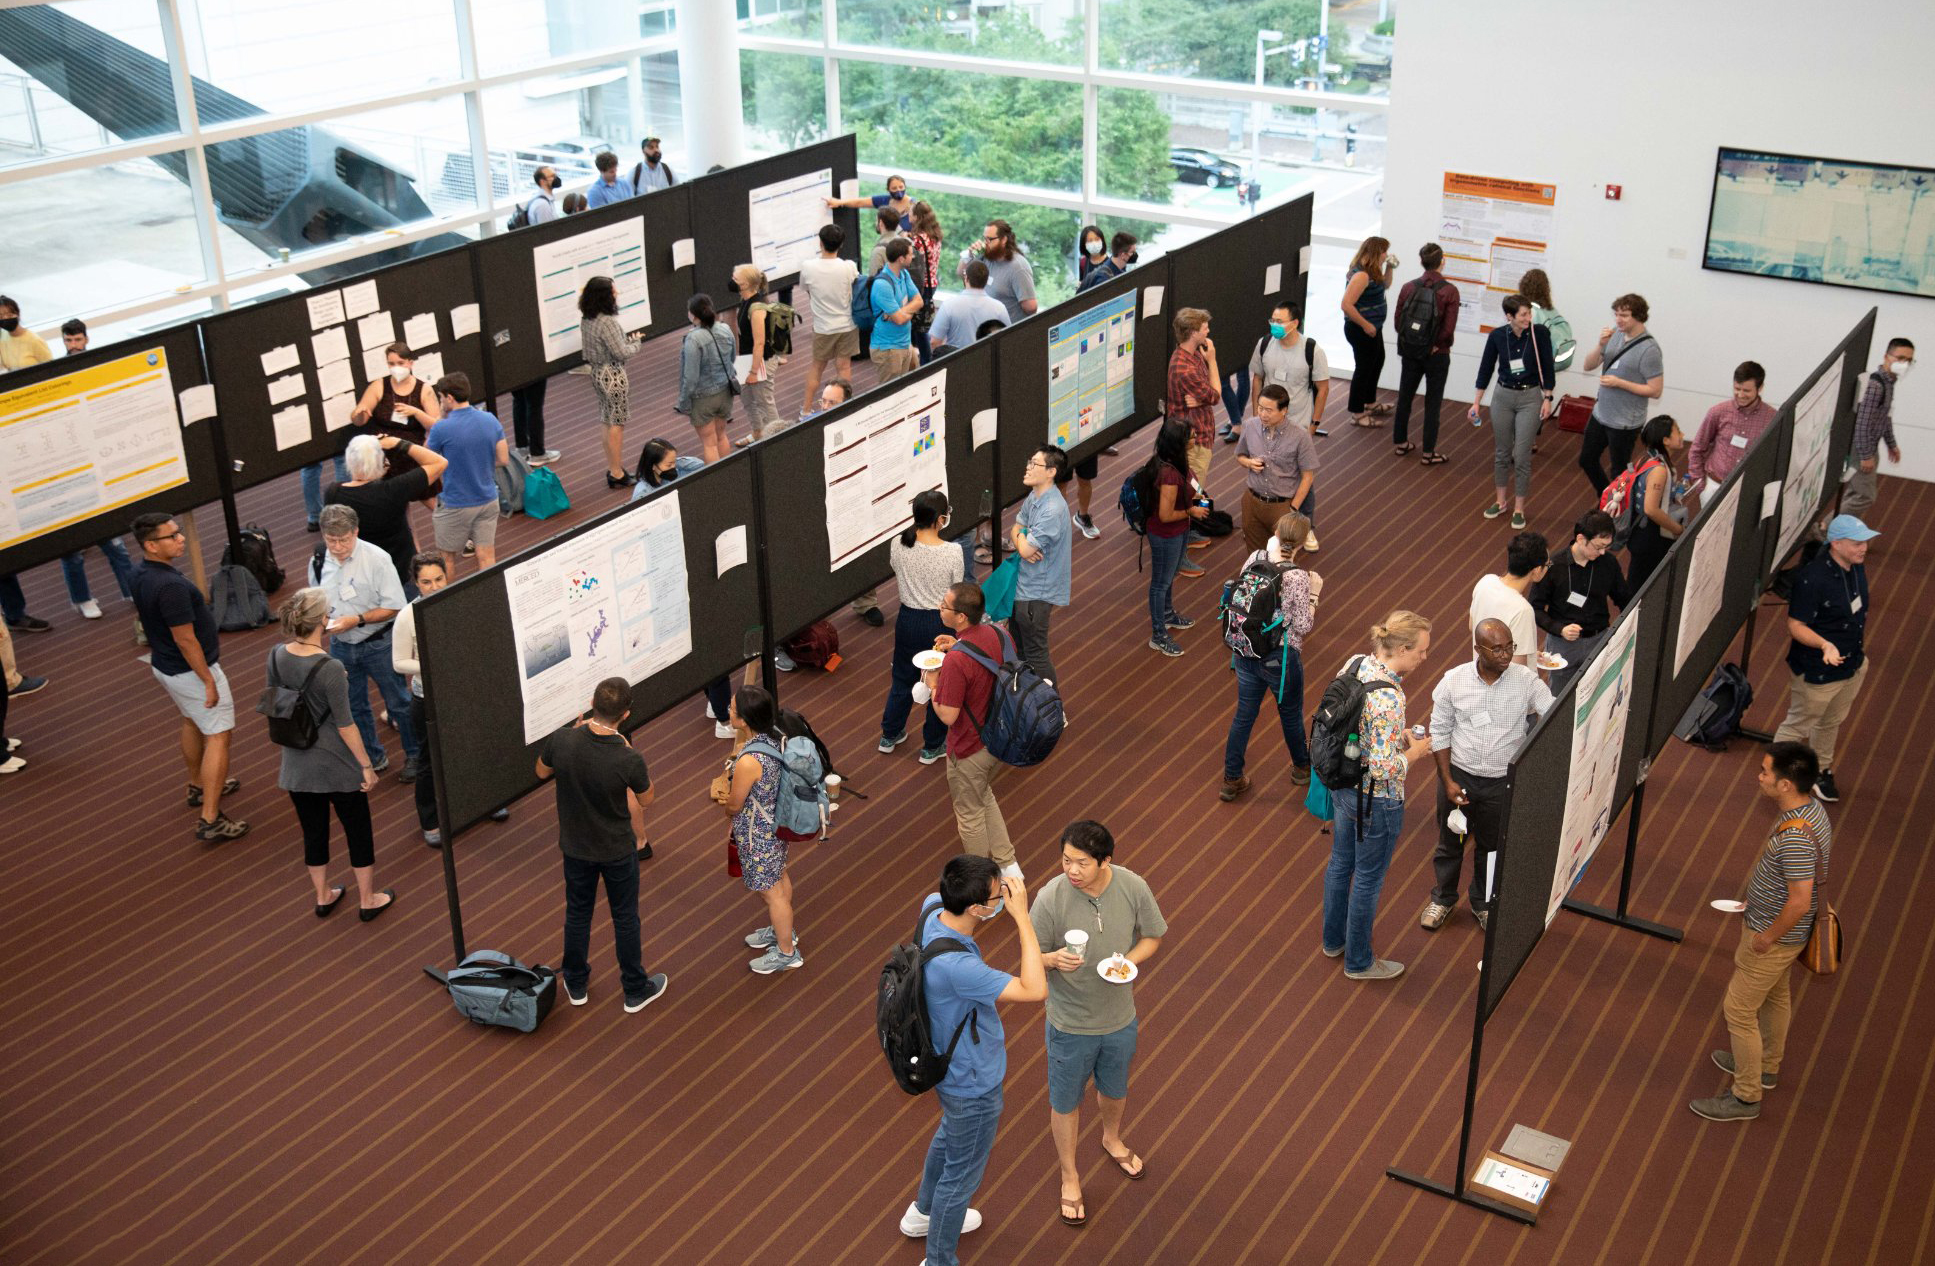 Attendees enjoyed an interactive poster session at the 2022 SIAM Annual Meeting, which was held in Pittsburgh, Pa., in July 2022. During the 2024 SIAM Annual Meeting, which will take place in Spokane, Wash., this July, the Poster Session and Dessert Reception will allow conference-goers and presenters to mingle and discuss cutting-edge research across a wide variety of mathematical areas. SIAM photo.